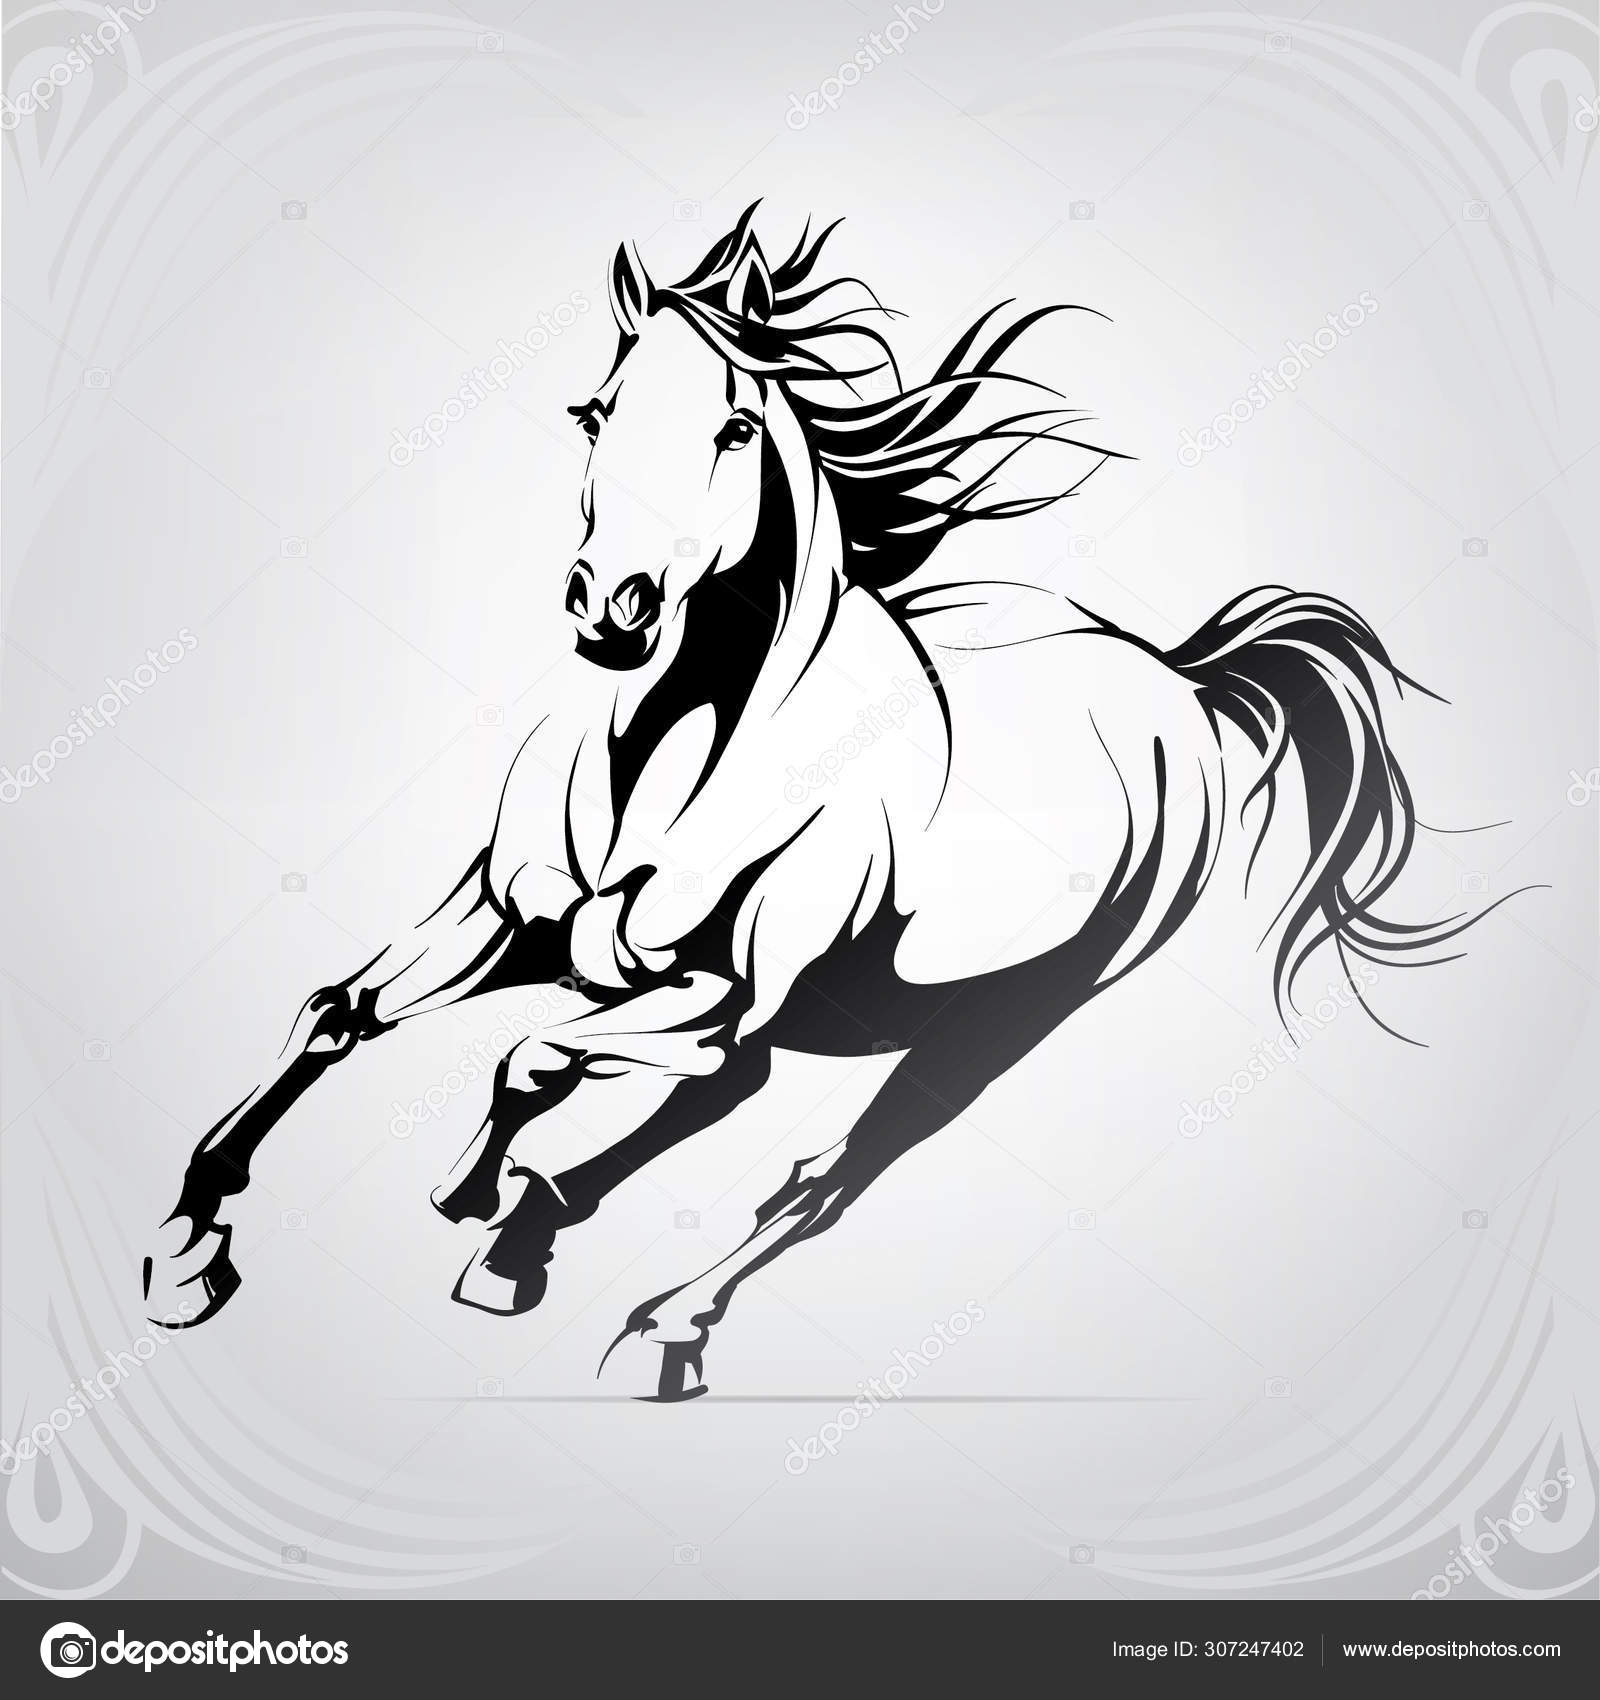 Silhouette Of The Running Horse Vector Image By C Nutriaaa Vector Stock